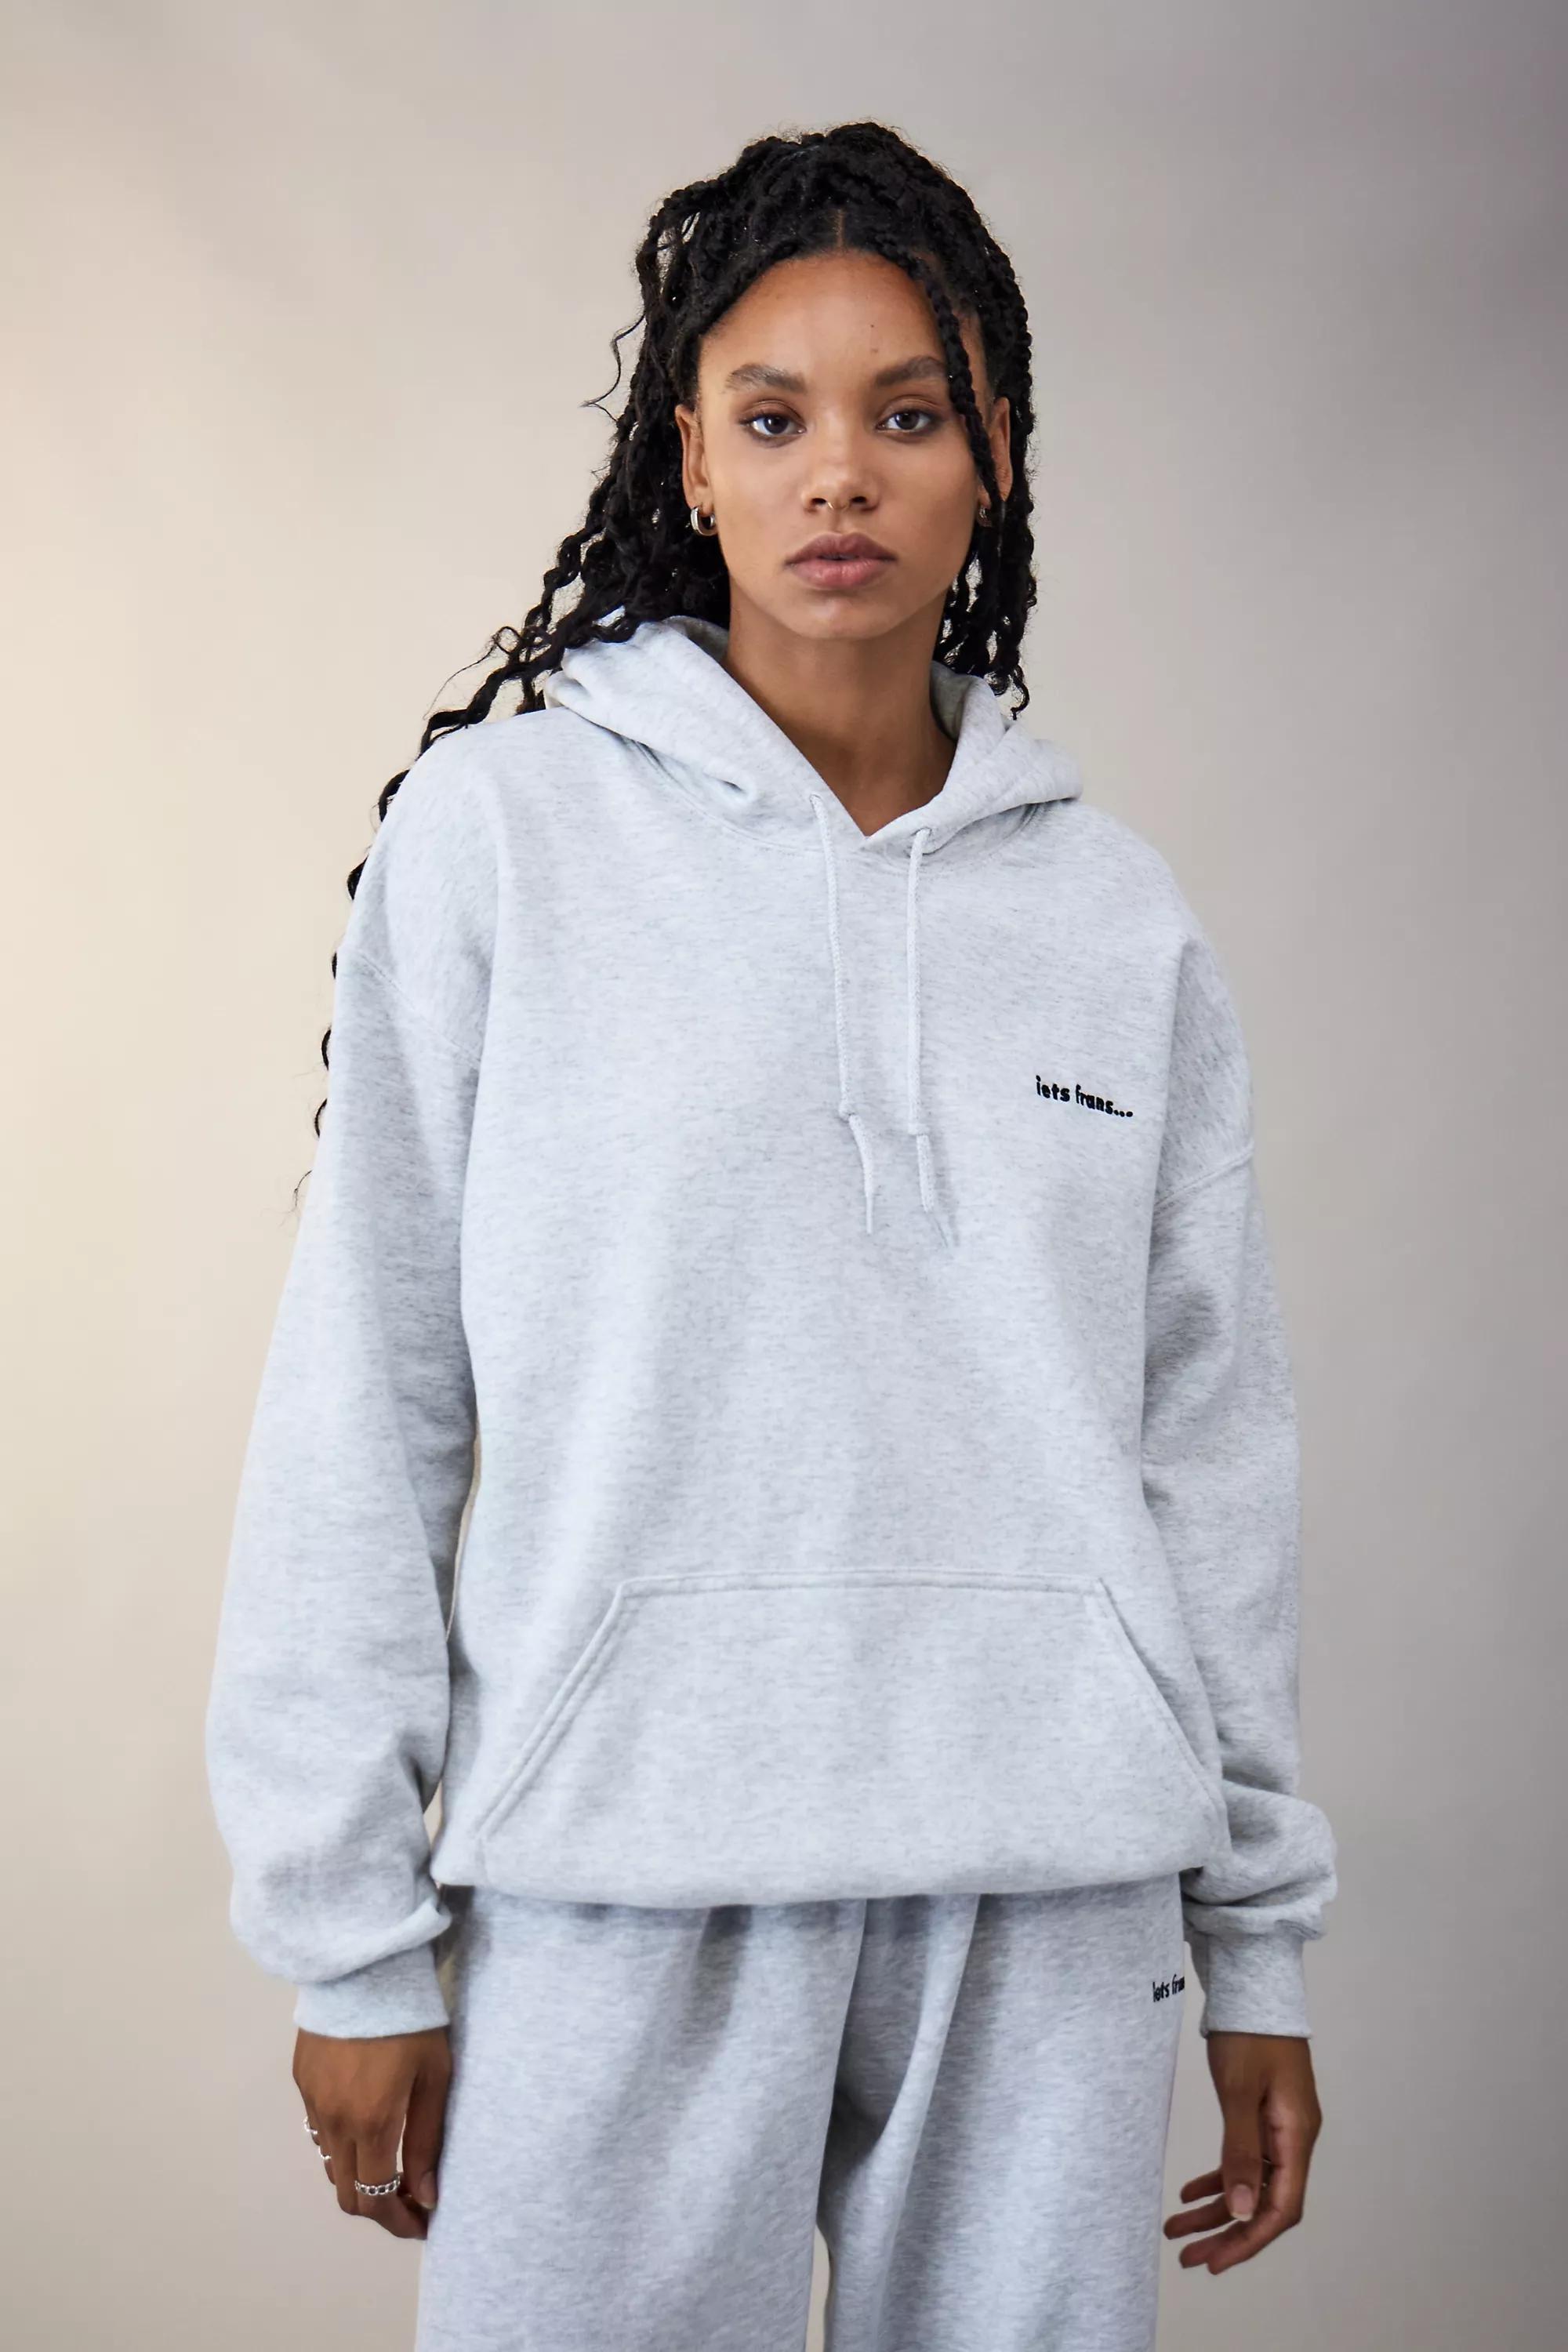 Urban Outfitters - Grey Iets Frans... Marl Hoodie